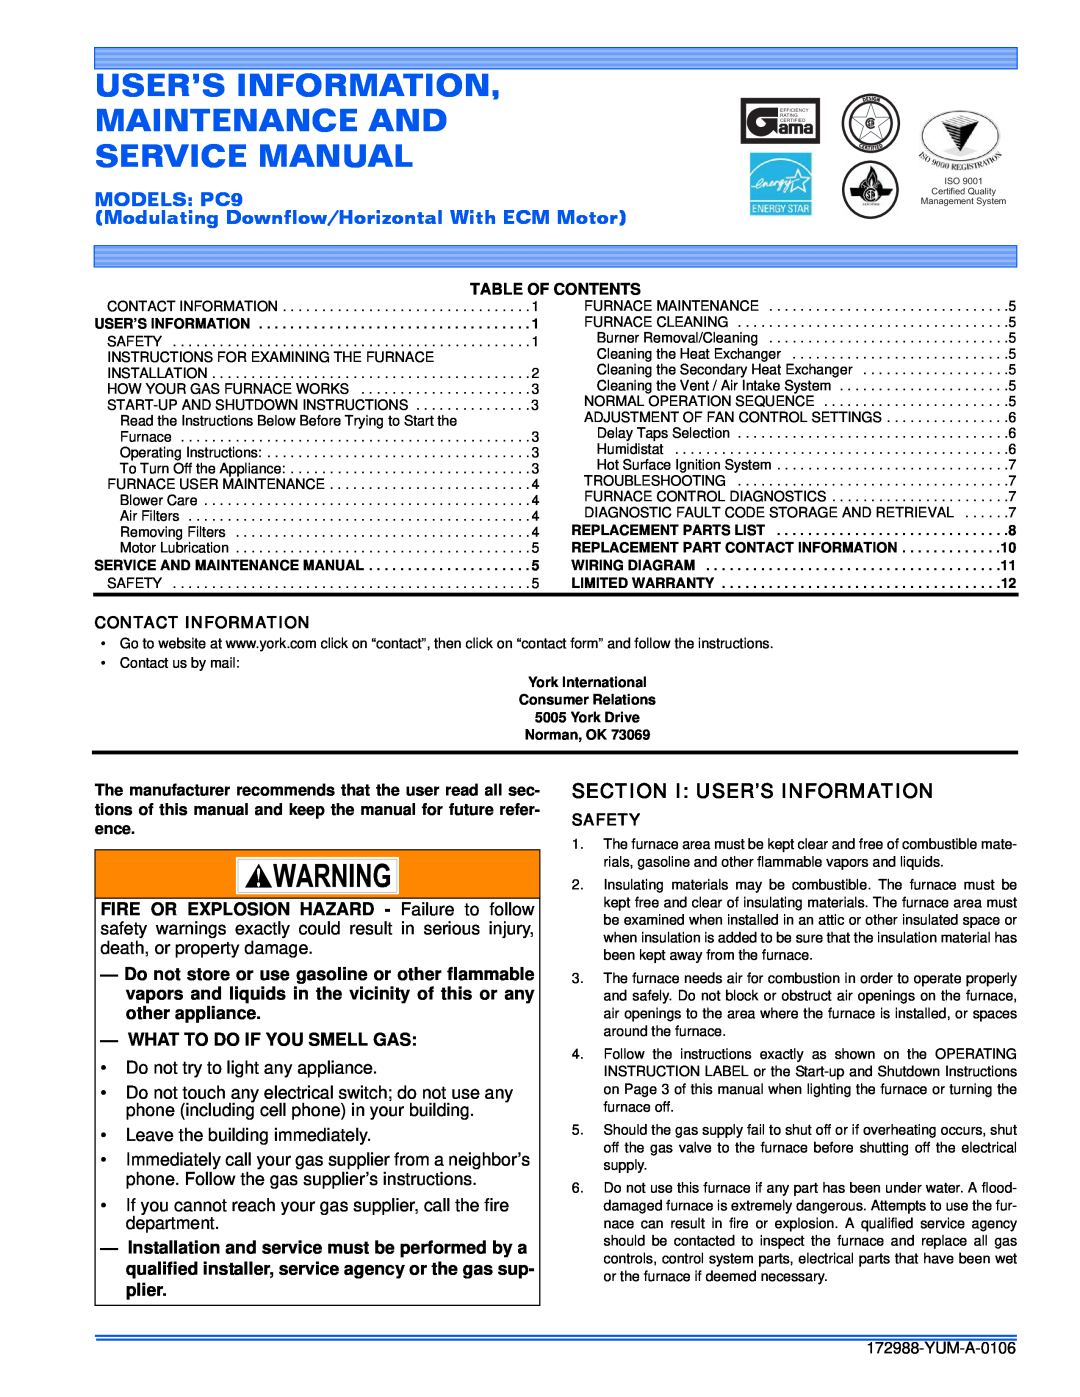 York service manual Section I User’S Information, MODELS PC9, Modulating Downflow/Horizontal With ECM Motor 